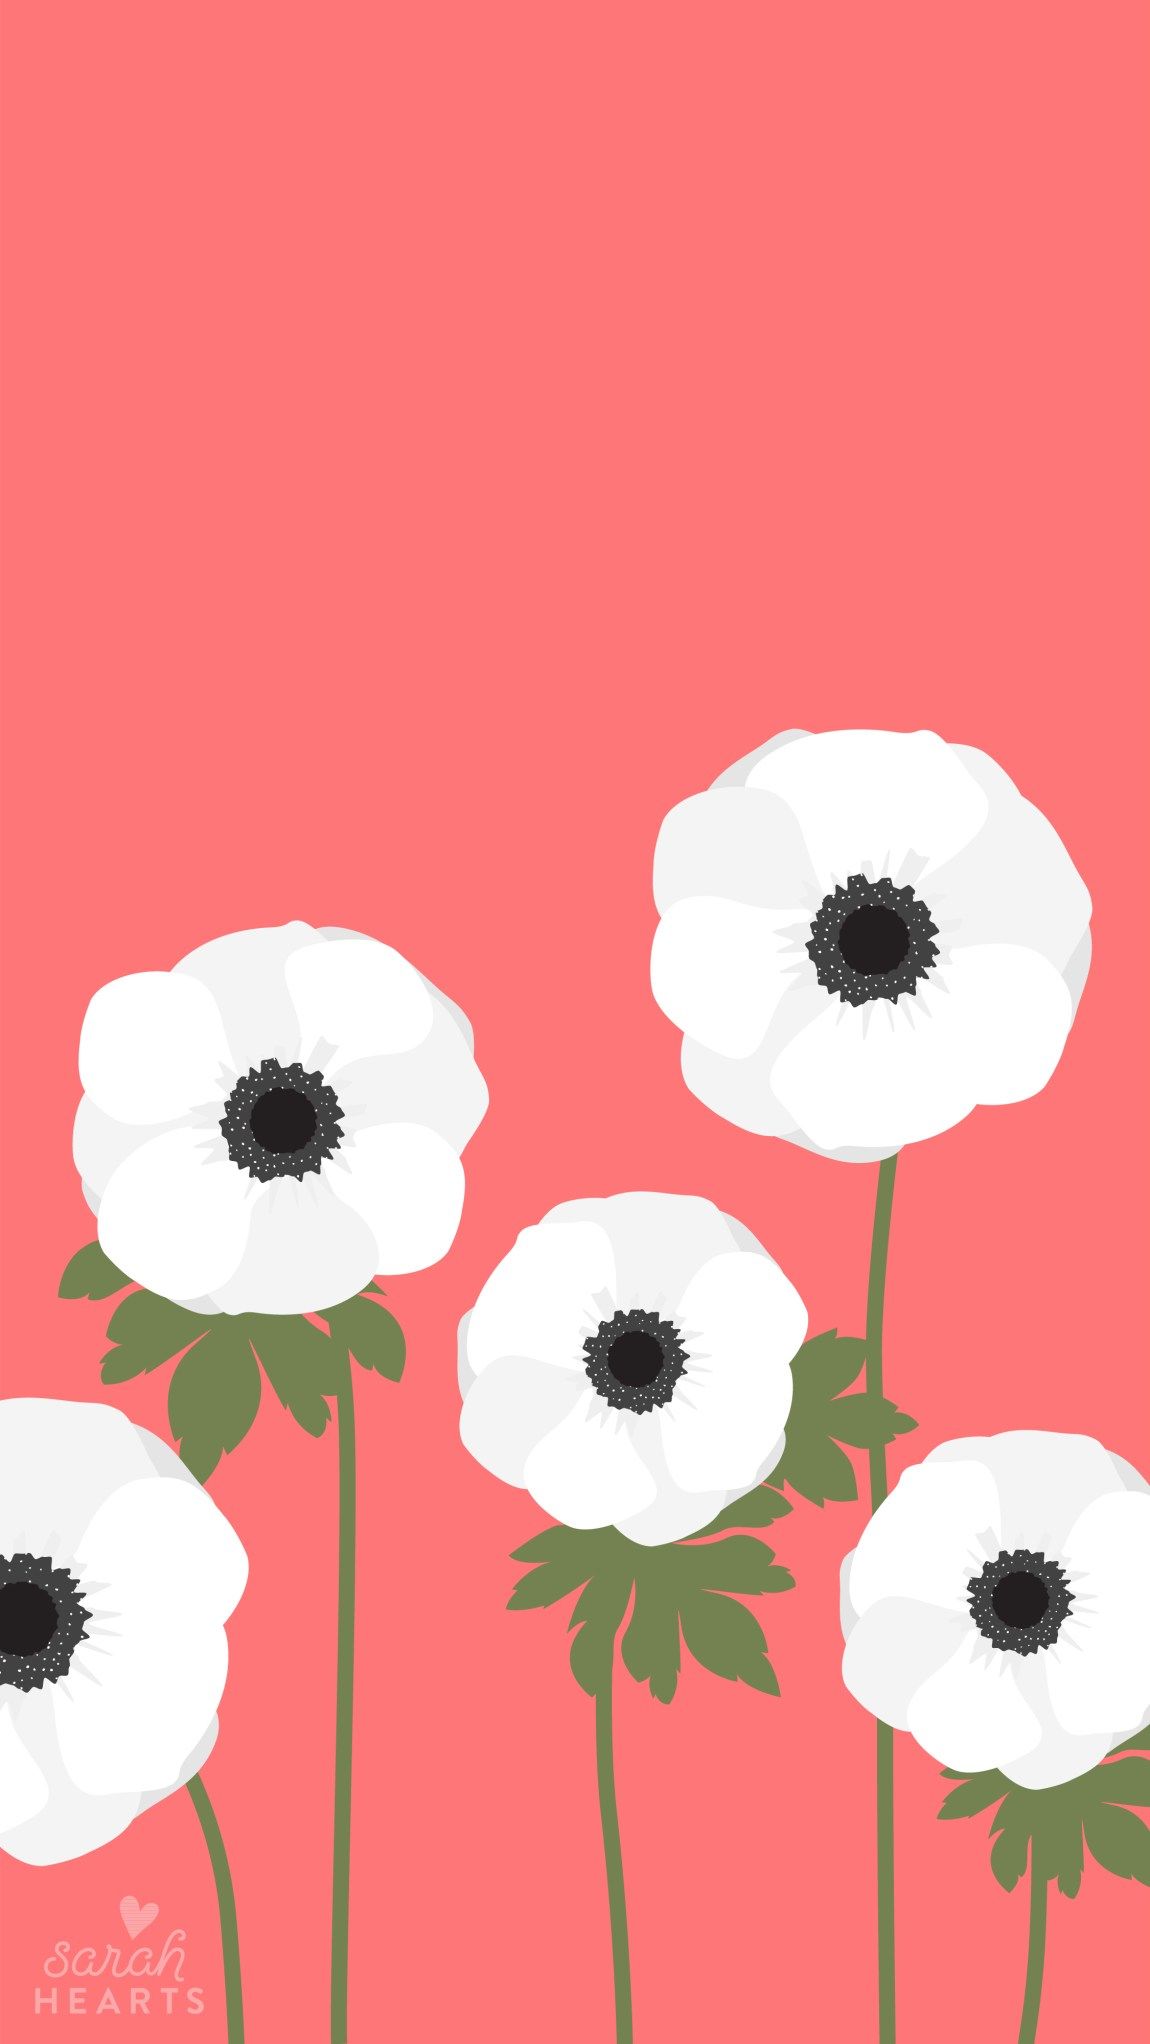 A poster of white flowers on pink background - April